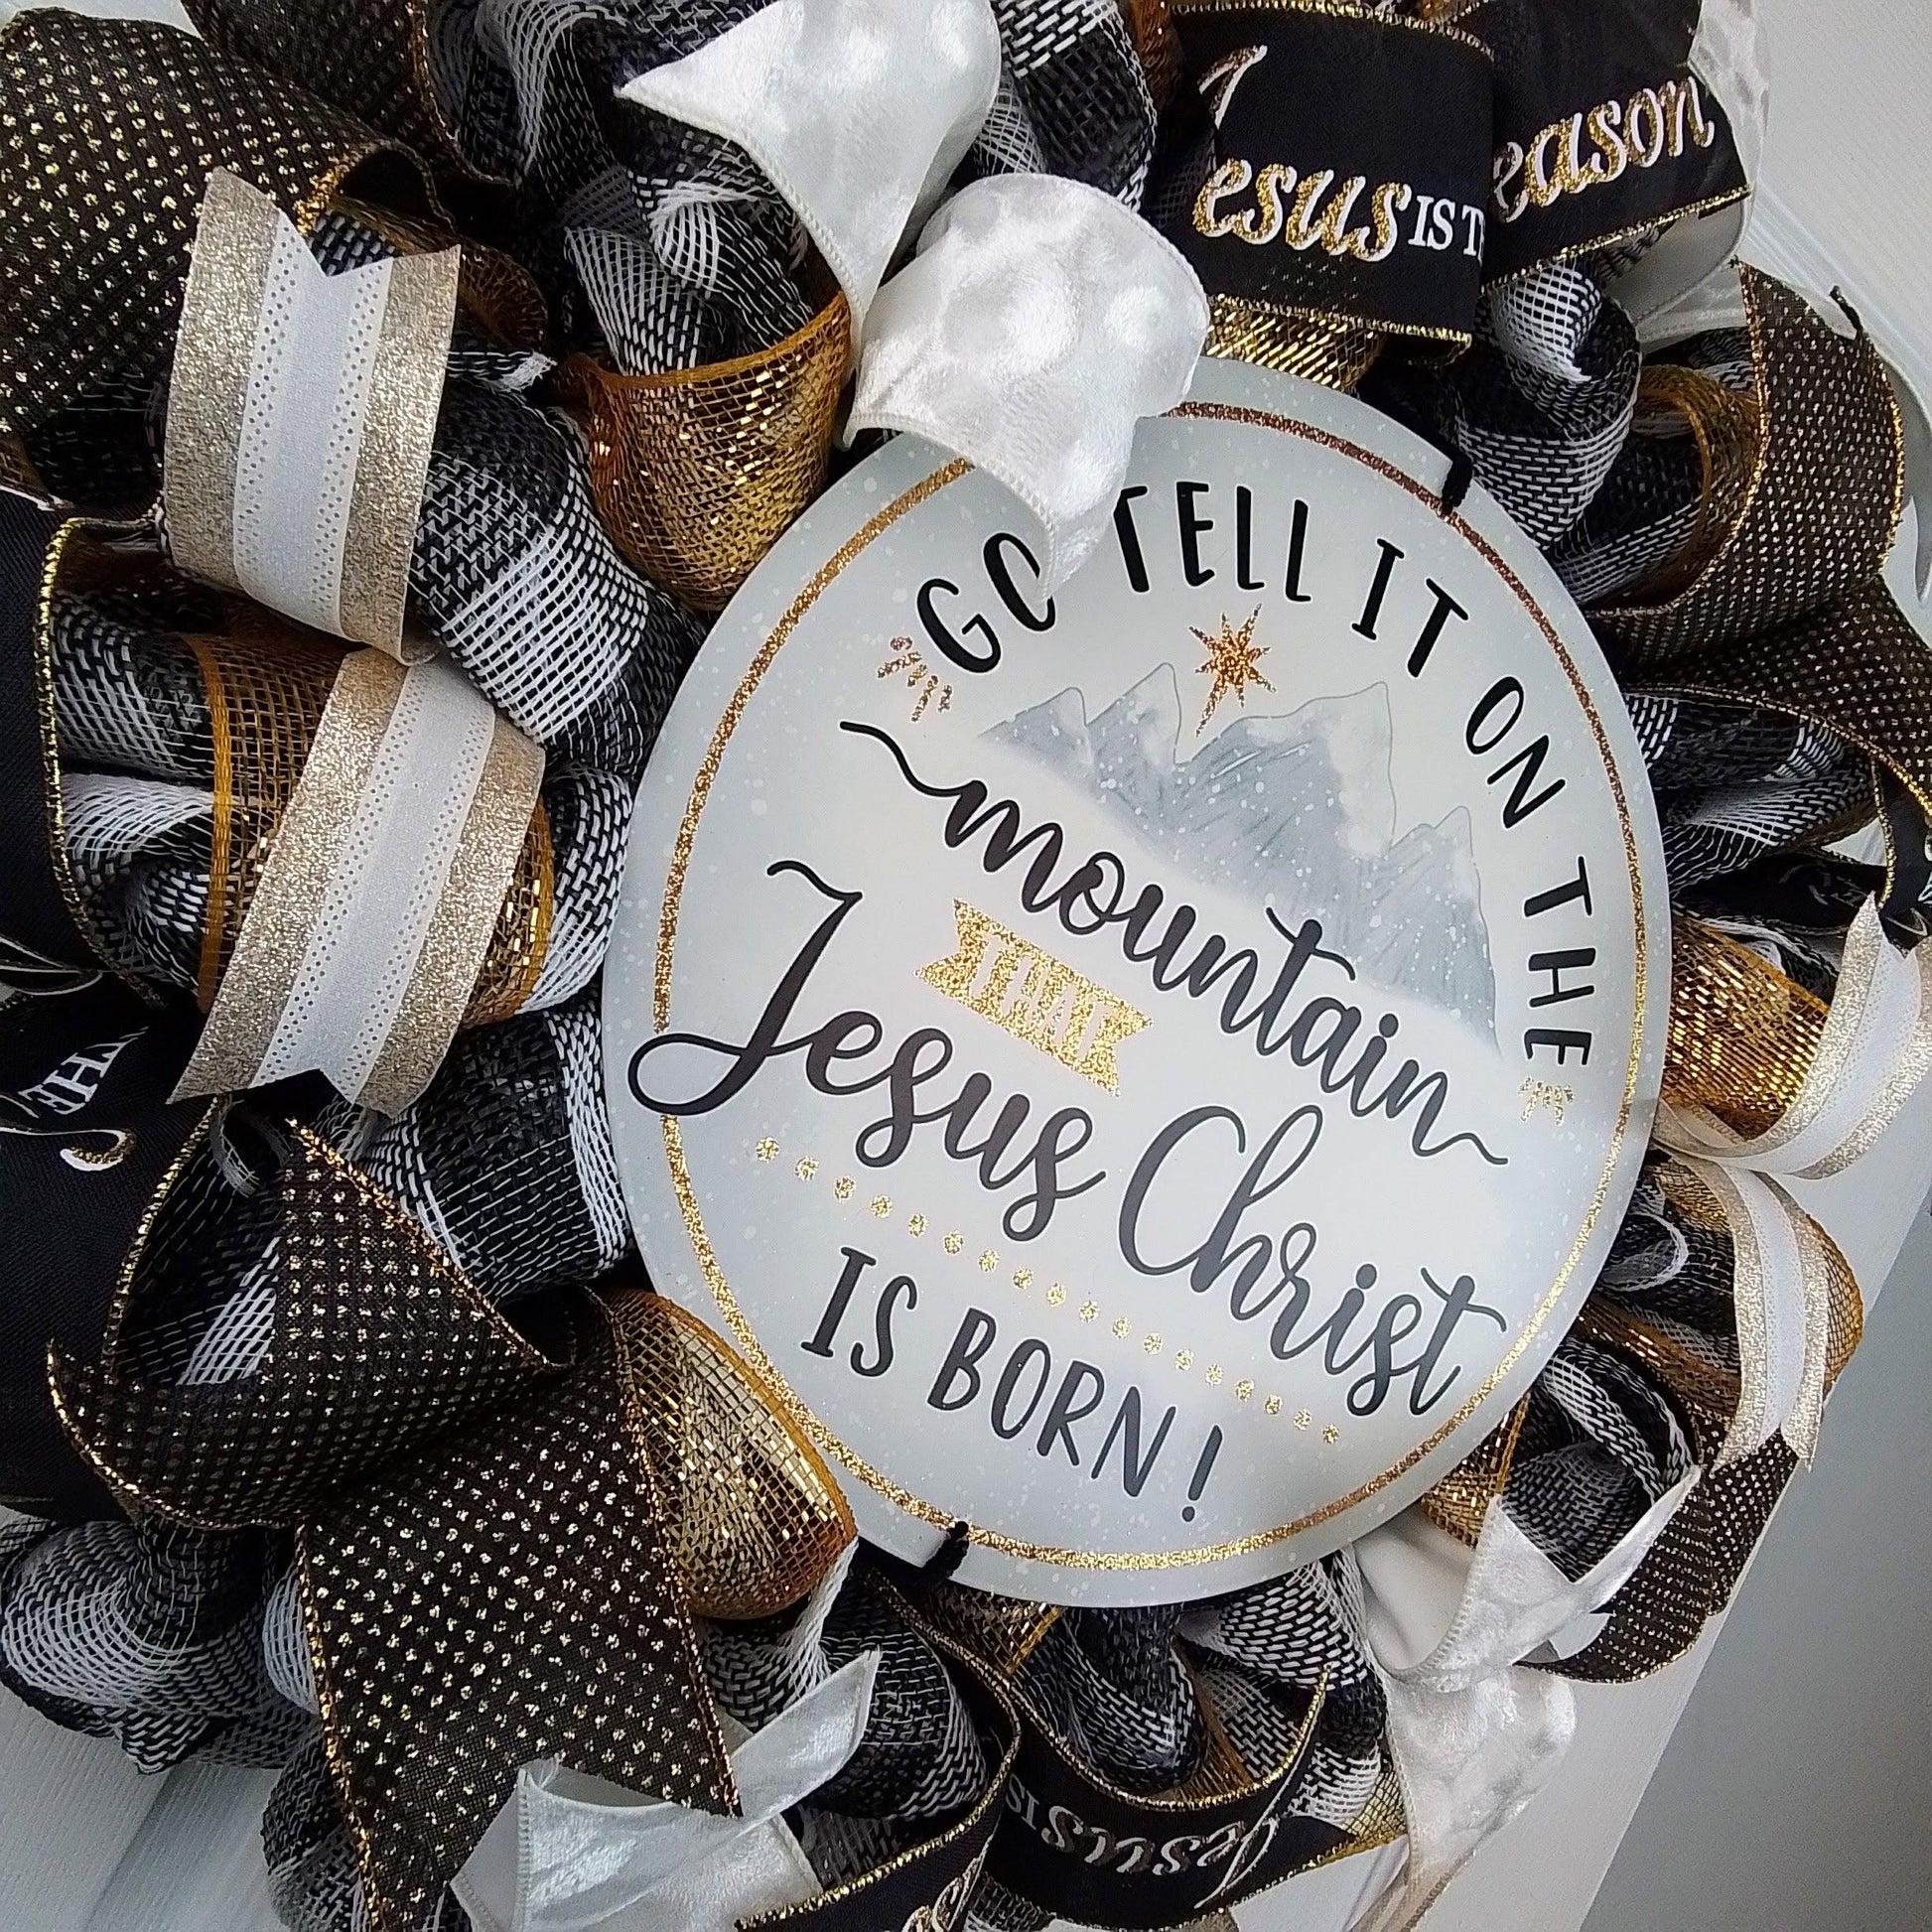 Go Tell it on the Mountain that Jesus Christ is Born Christmas Wreath - Church Christian Religious Front Door Wreath - Black Gold White Farmhouse - Pink Door Wreaths